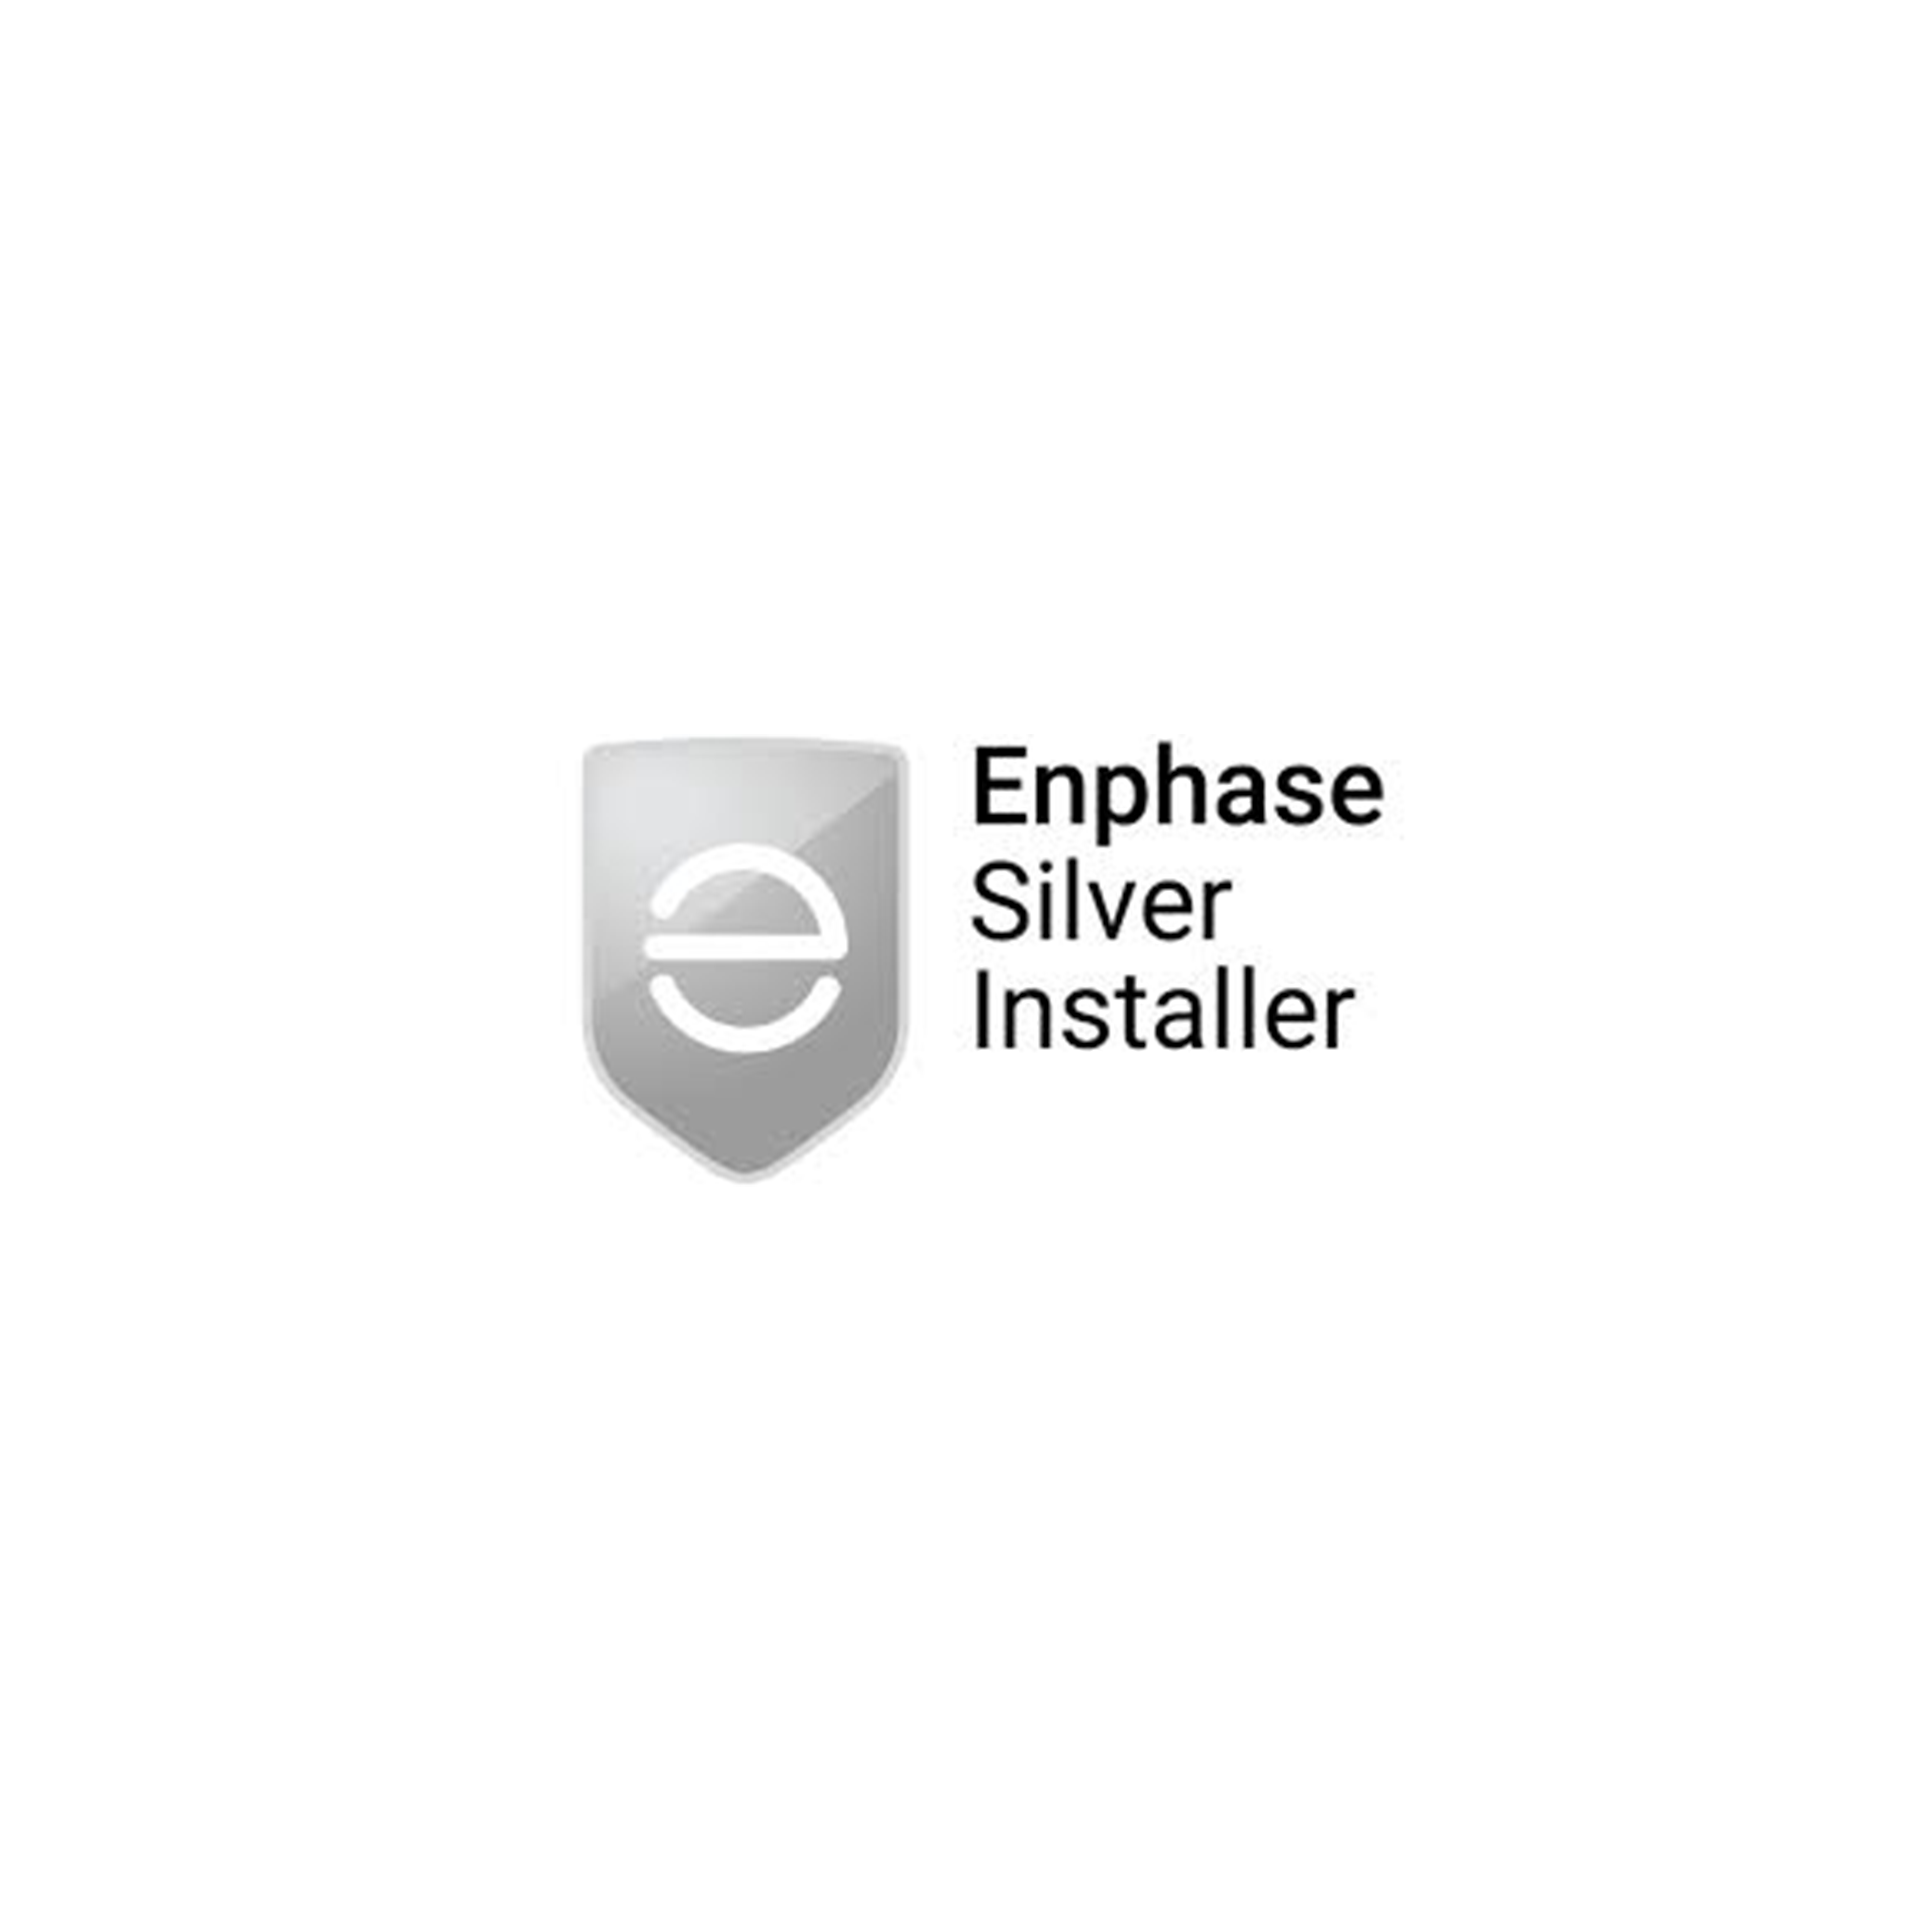 The enphase silver installer logo is on a white background.